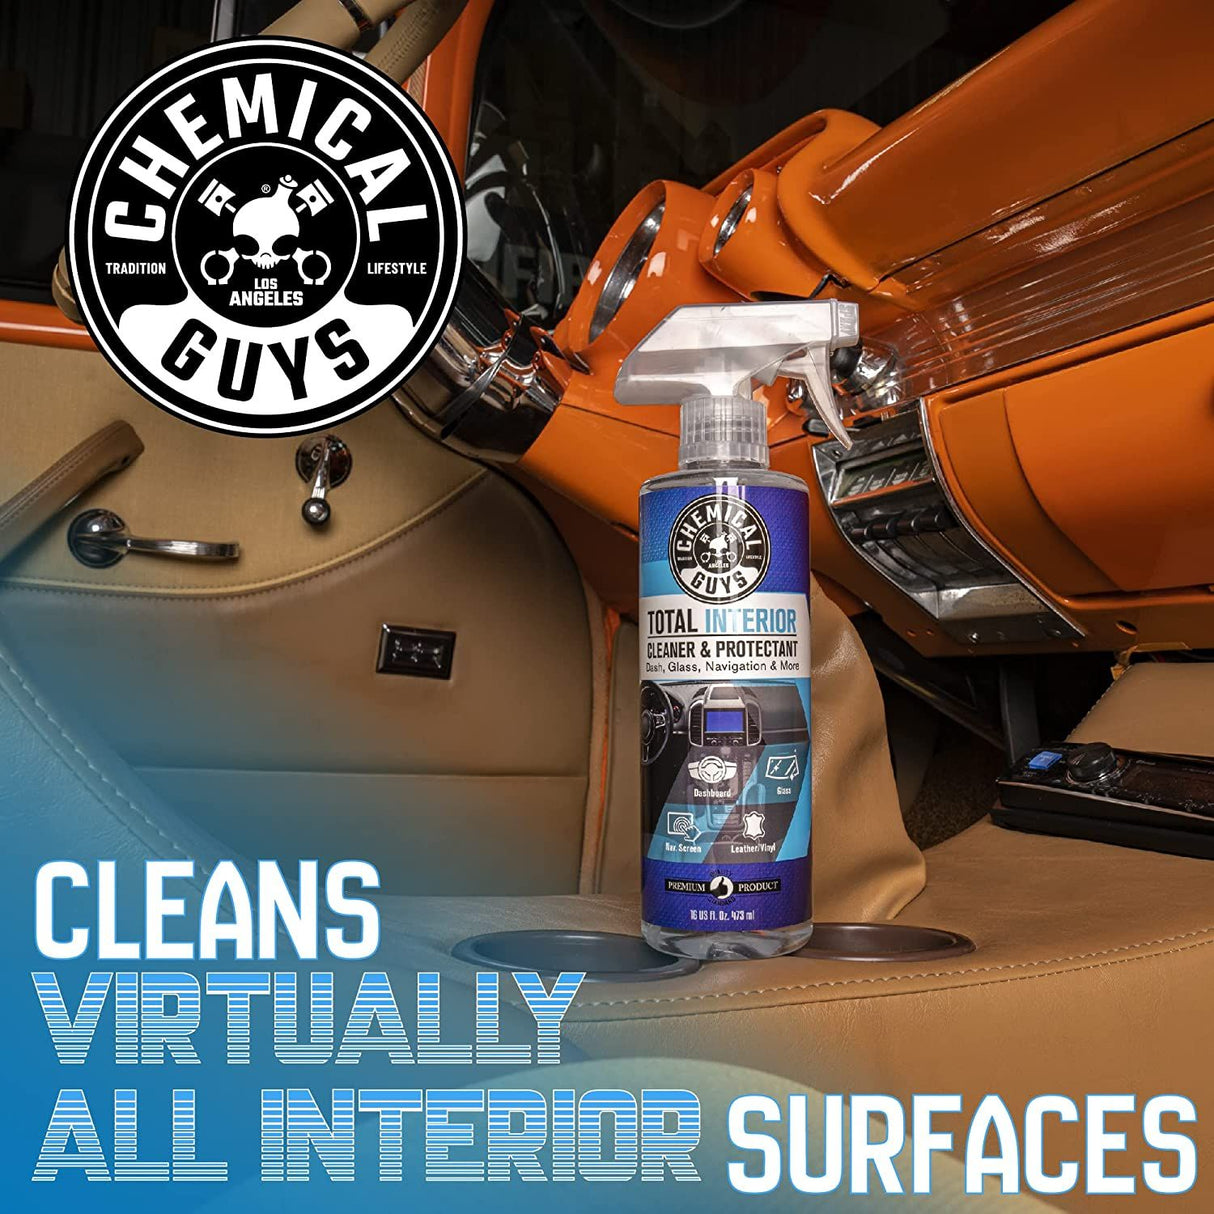 Chemical Guys Total Interior Cleaner & Protectant 473ml | Just Car Care